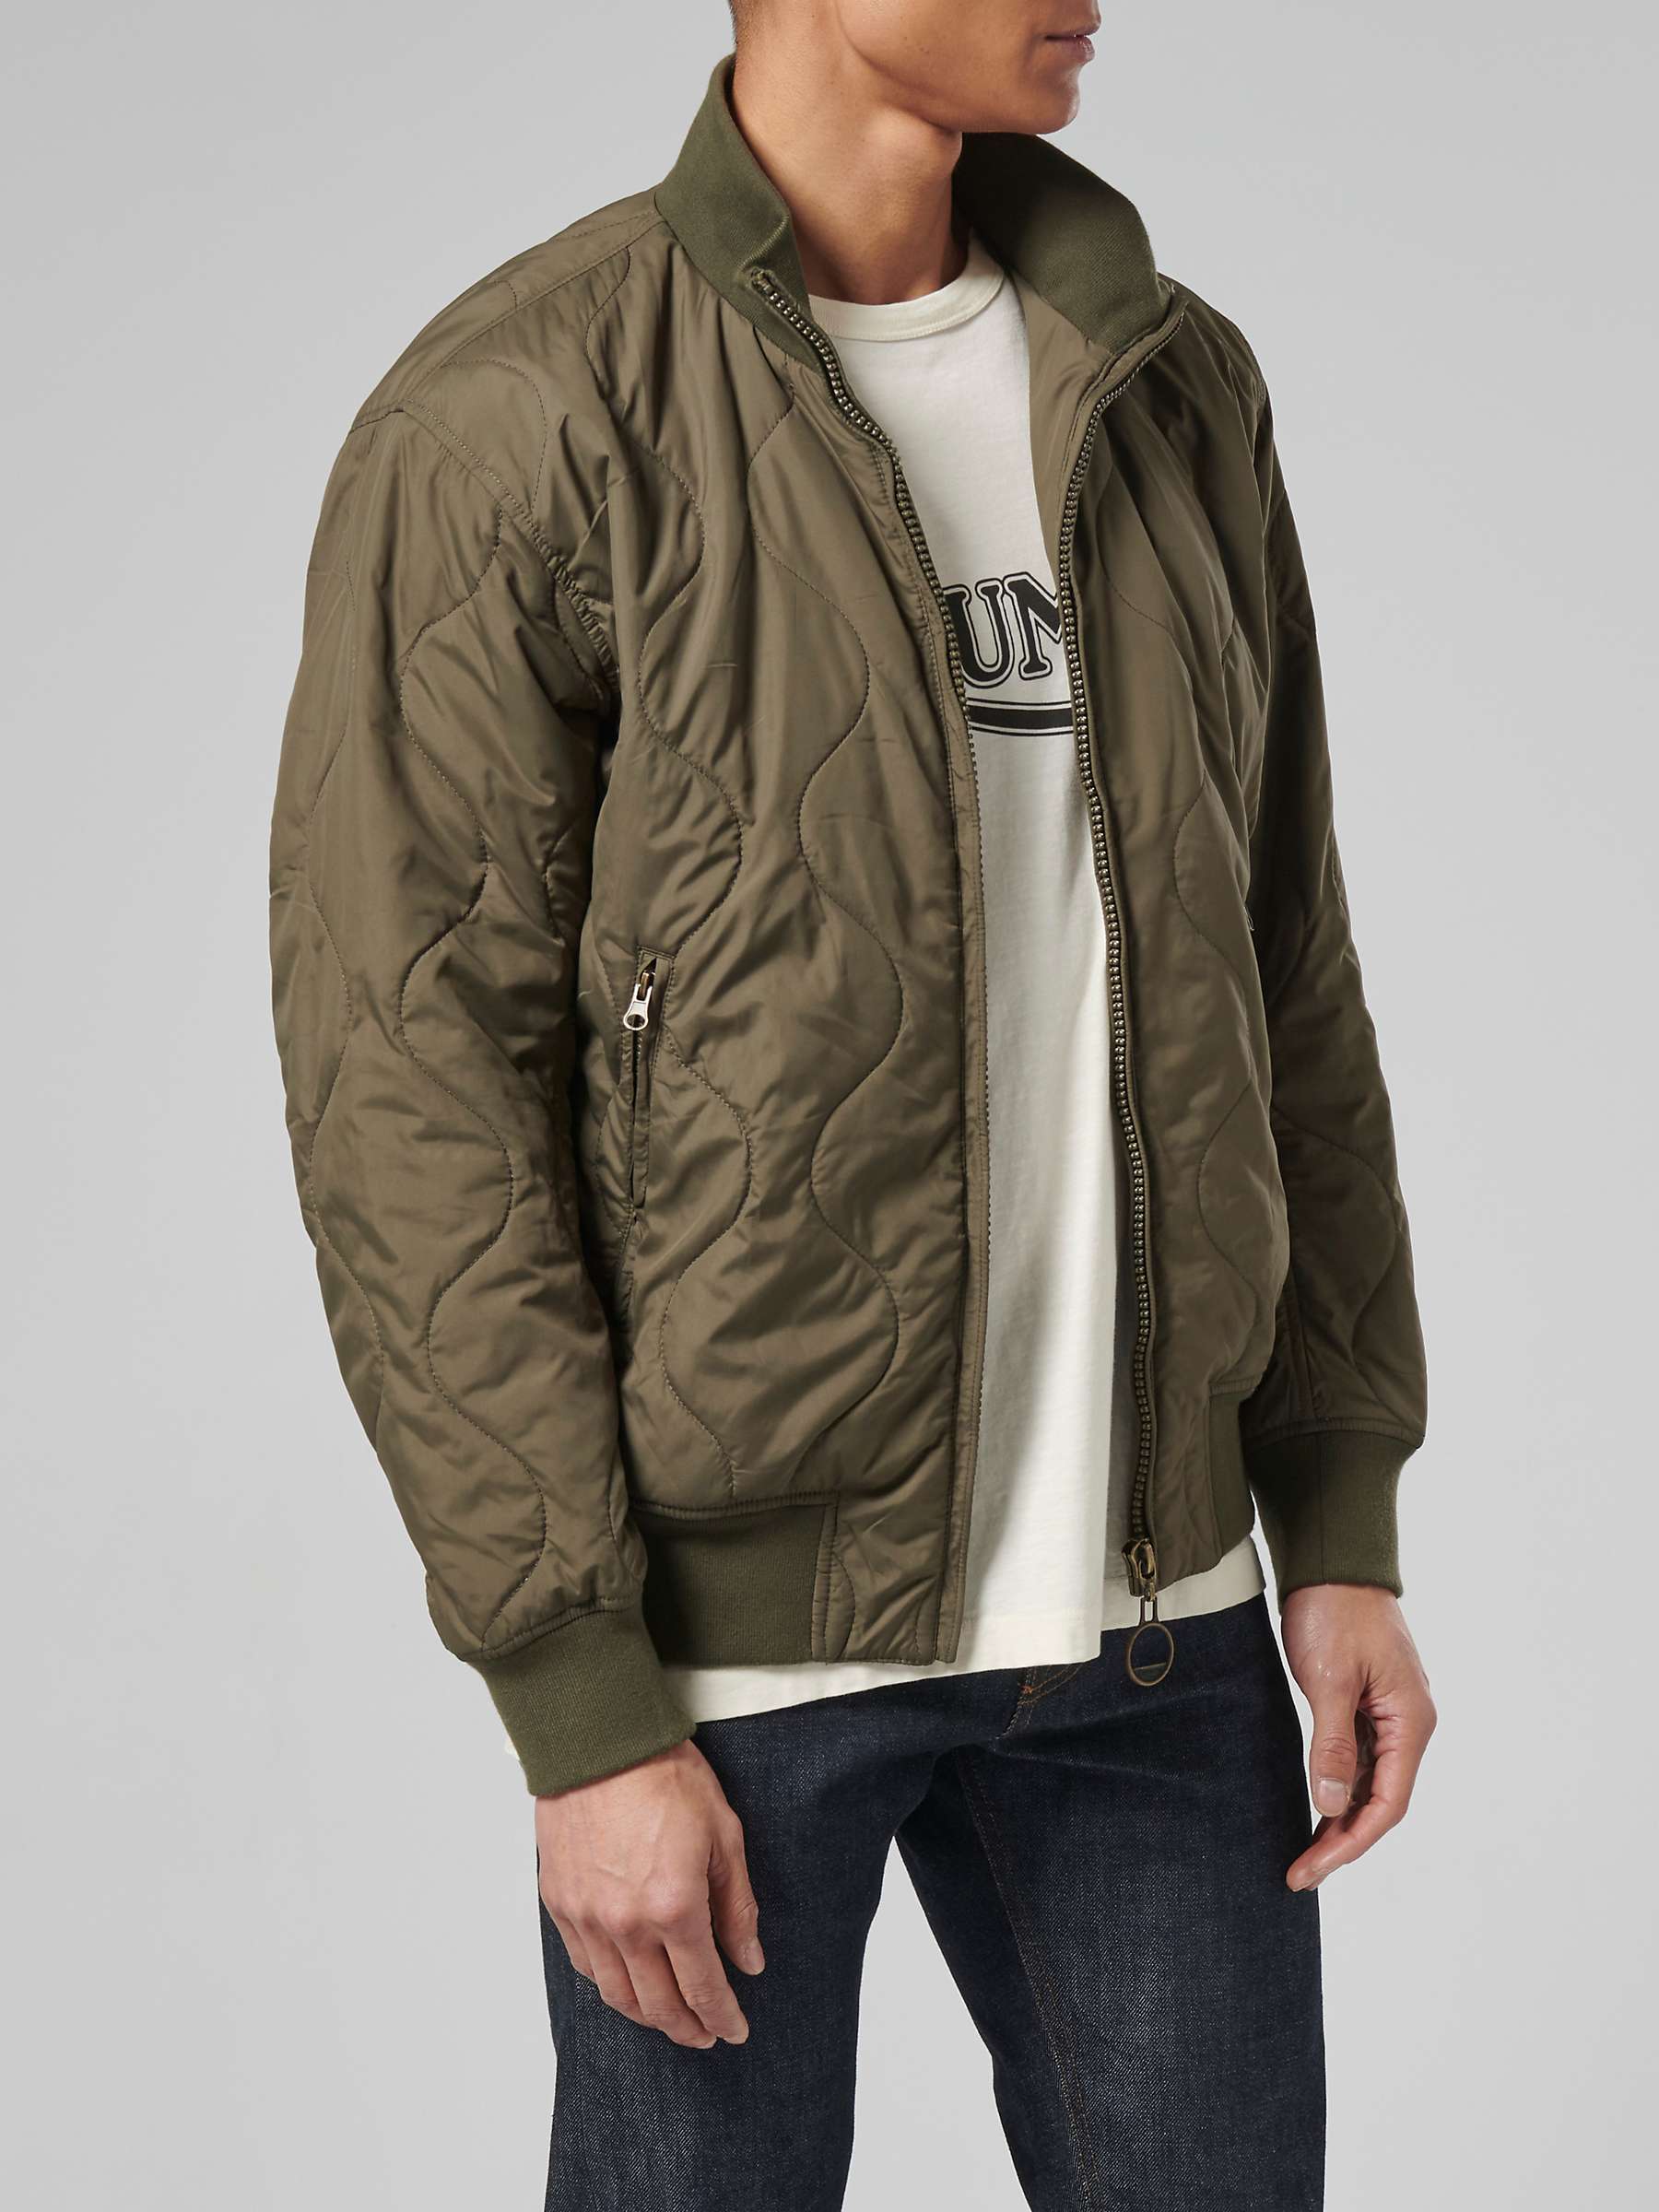 Buy Triumph Motorcycles Crown Bomber Jacket Online at johnlewis.com